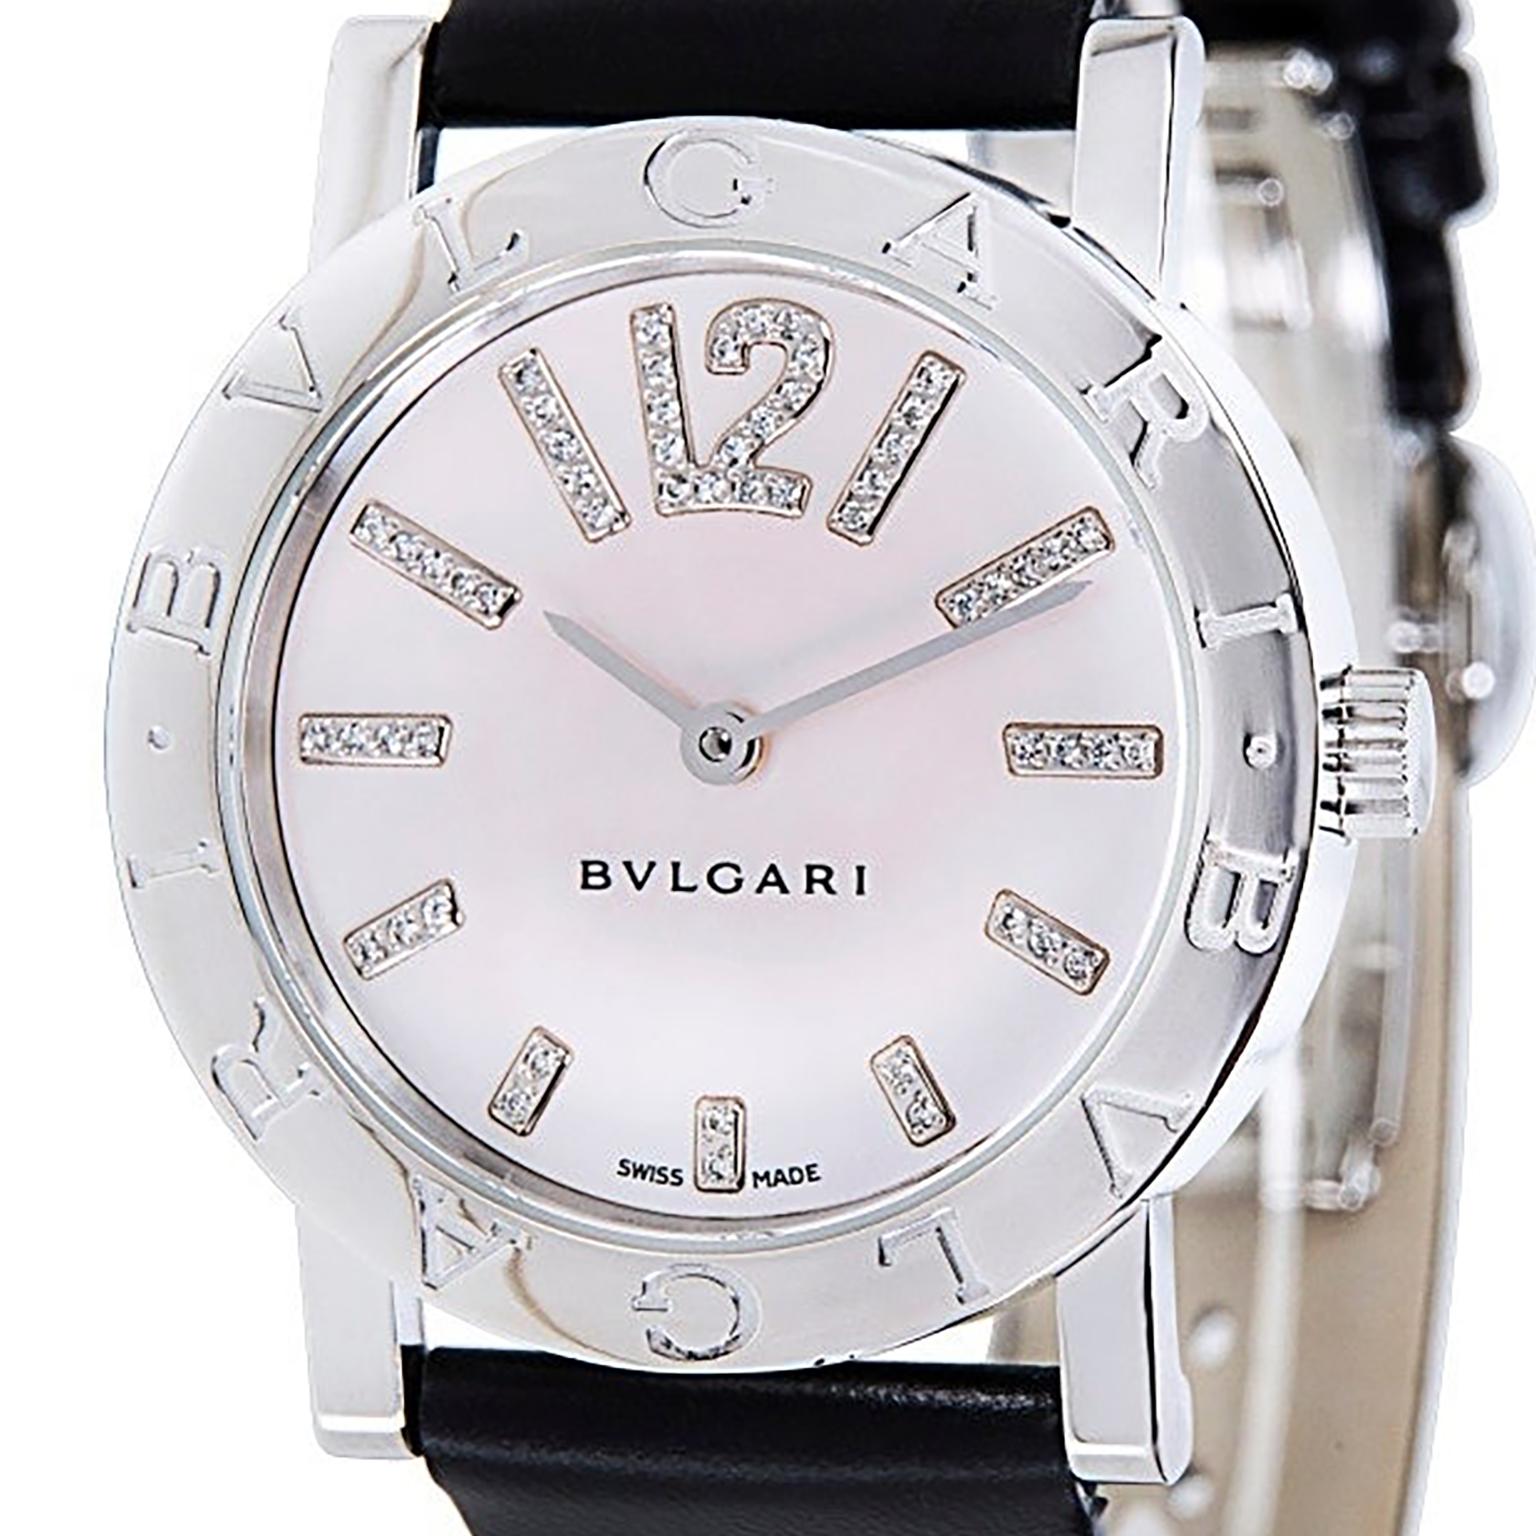 Bvlgari stainless steel case with with a leather strap. Fixed bezel. Mother of Pearl dial with steel hands and index - Arabic numerals, diamonds in hour markers. Scratch resistant sapphire crystal. Case size: 33 mm. Round case shape. Not water